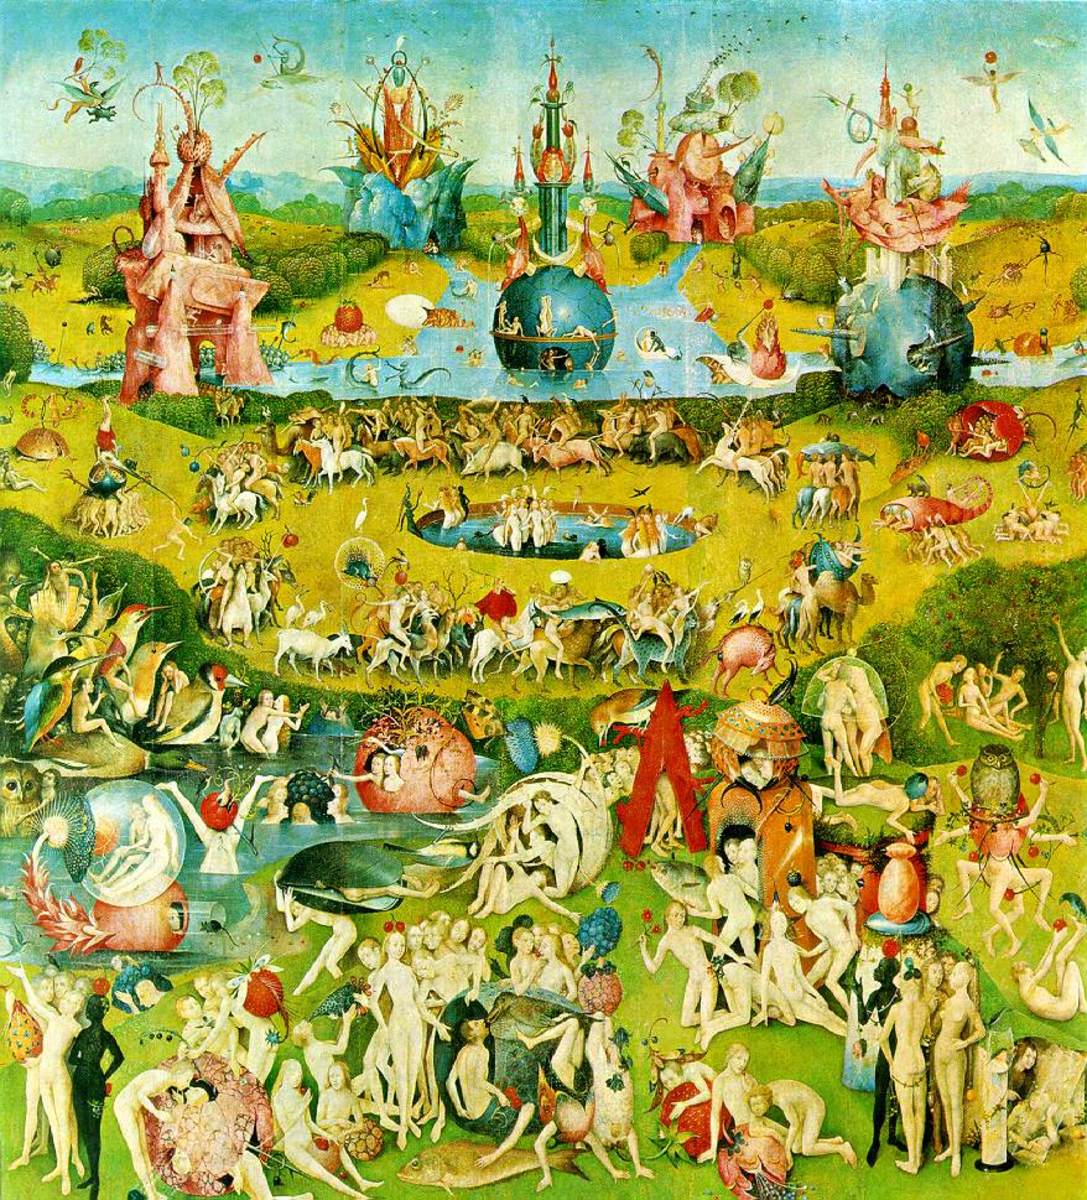 GARDEN OF EARTHLY DELIGHTS BY BOSCH 1510